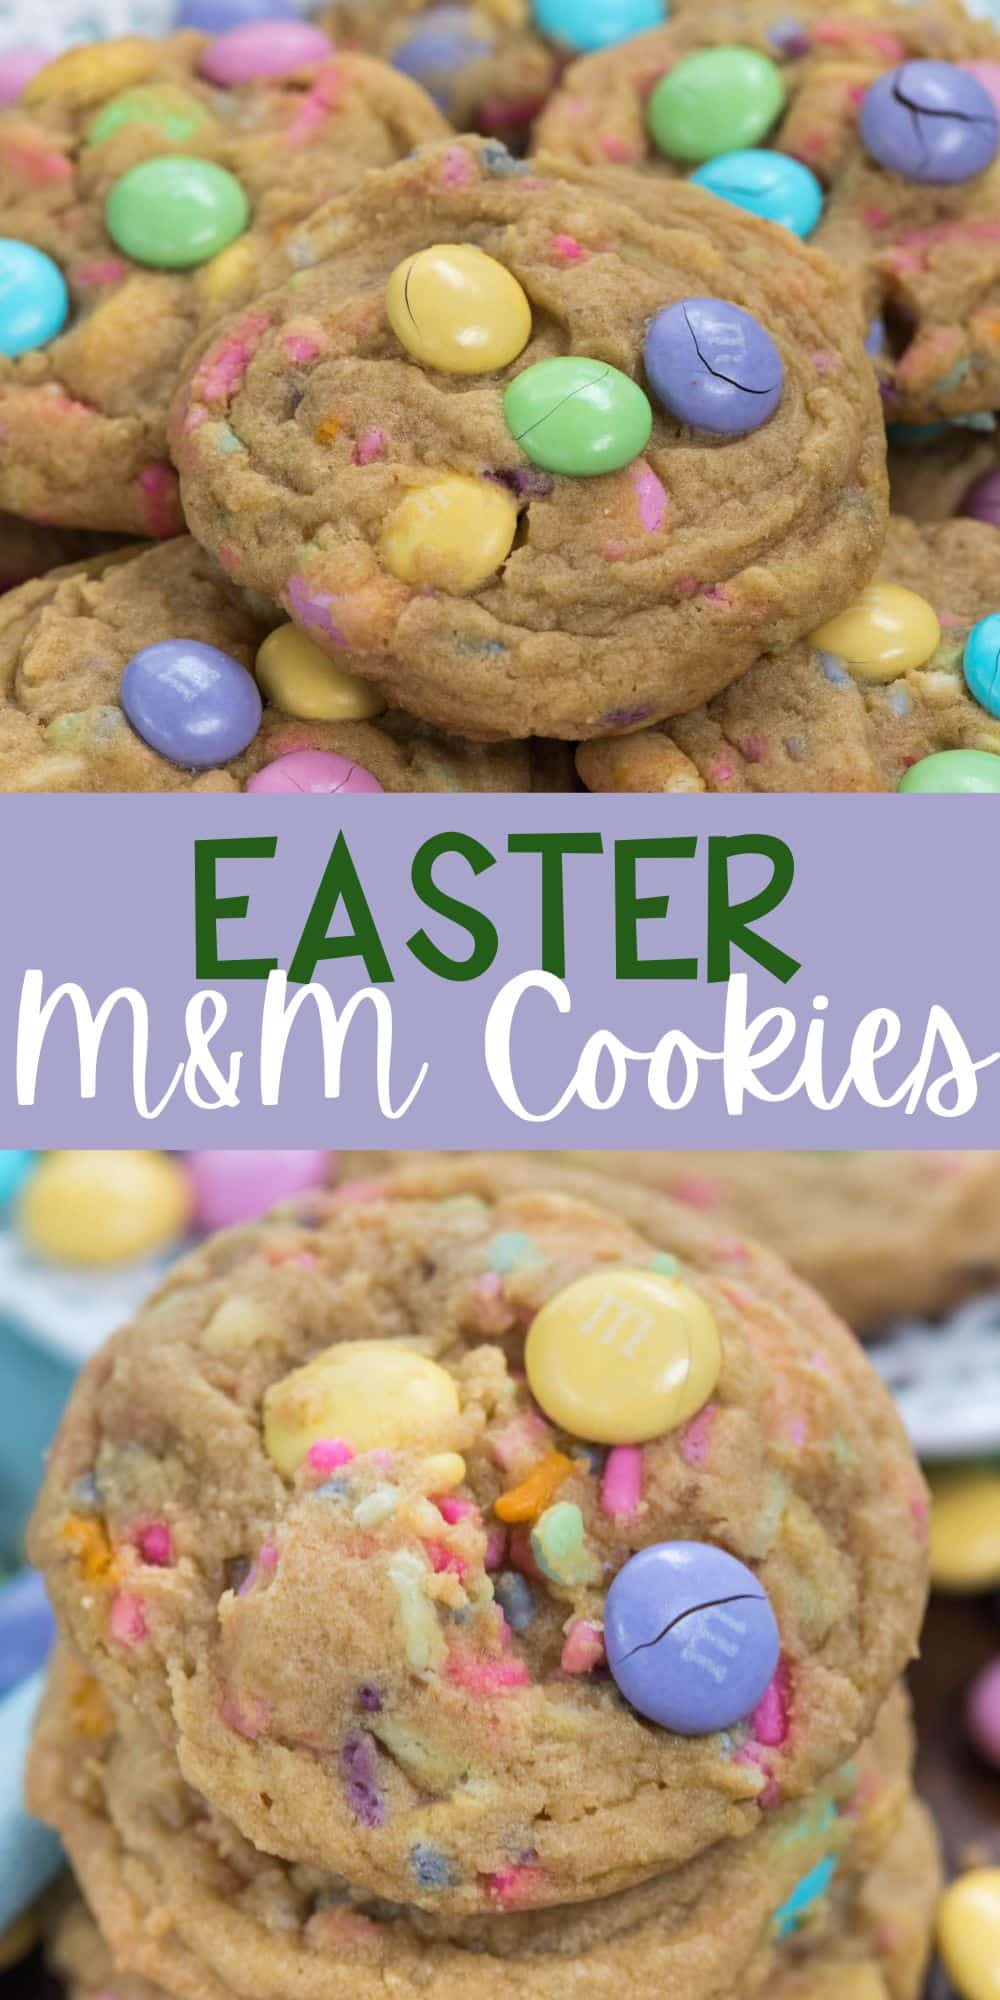 two photos of cookies with light purple, yellow, pink and green M&Ms baked into the cookies with words on the photo.